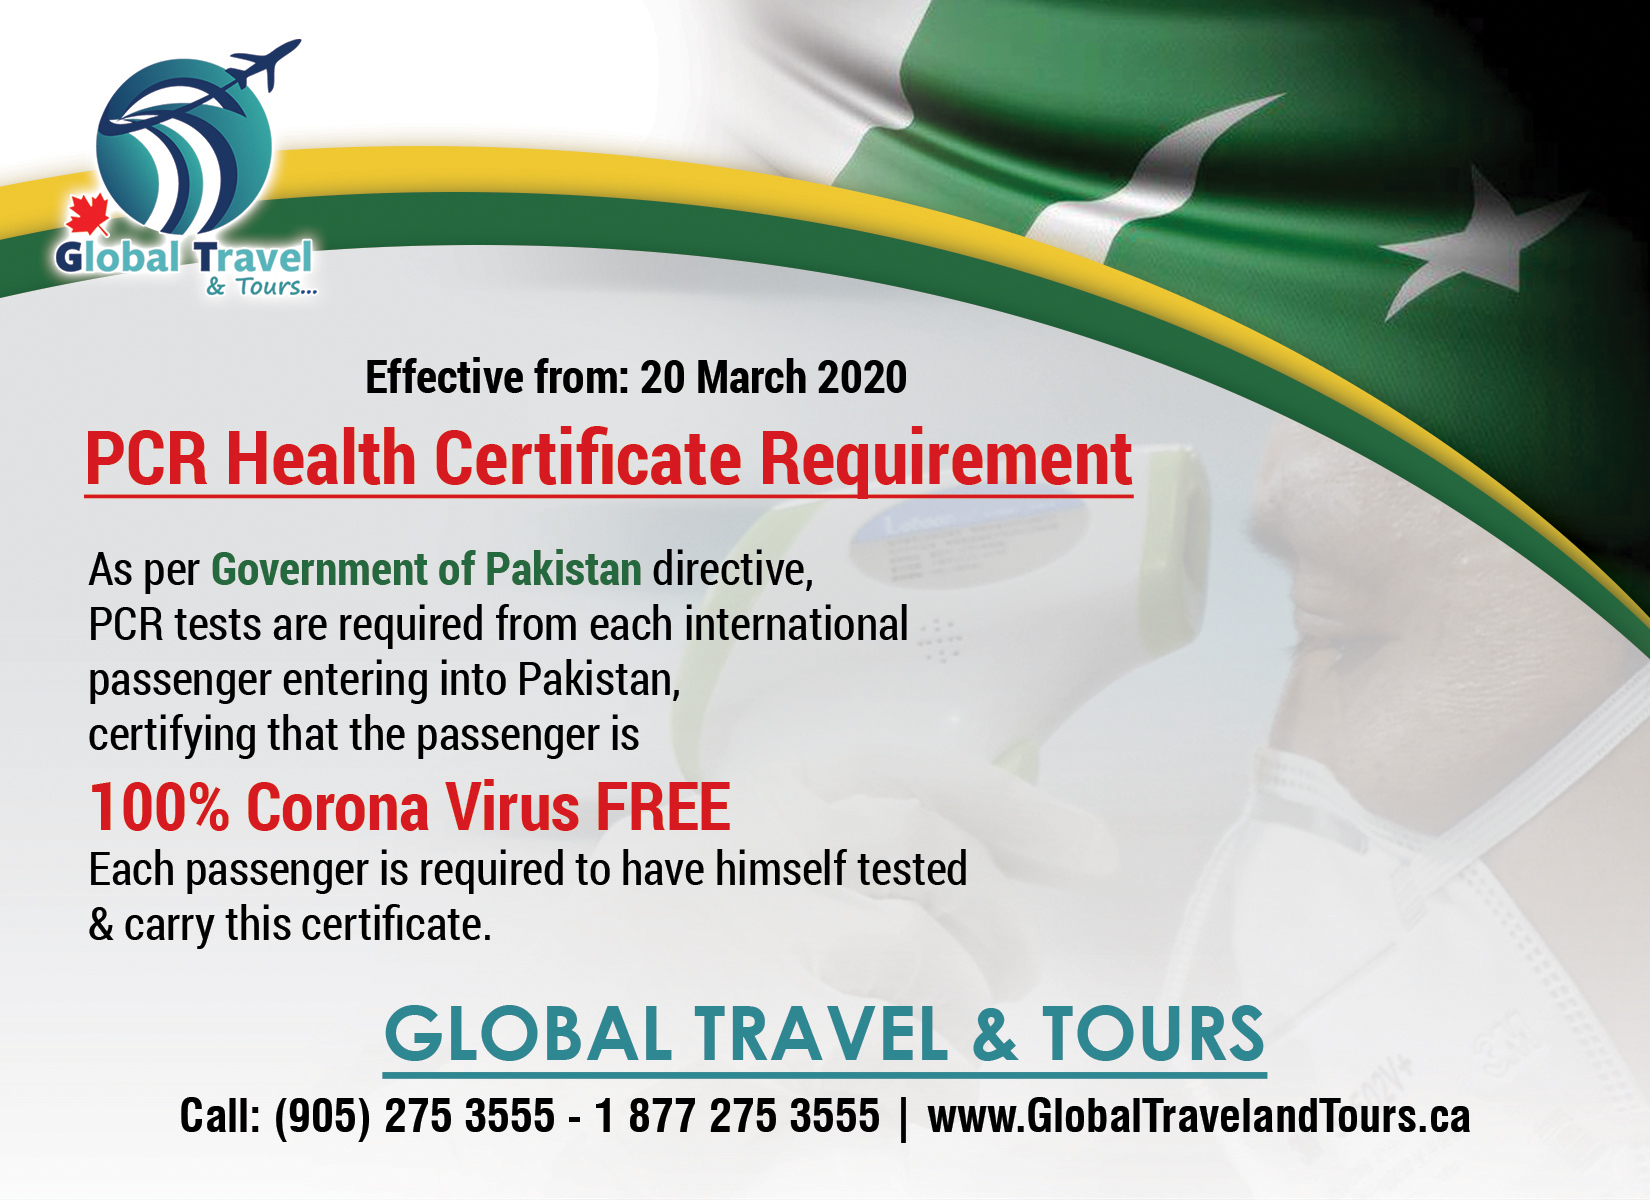 PCR Health Certificate Requirement